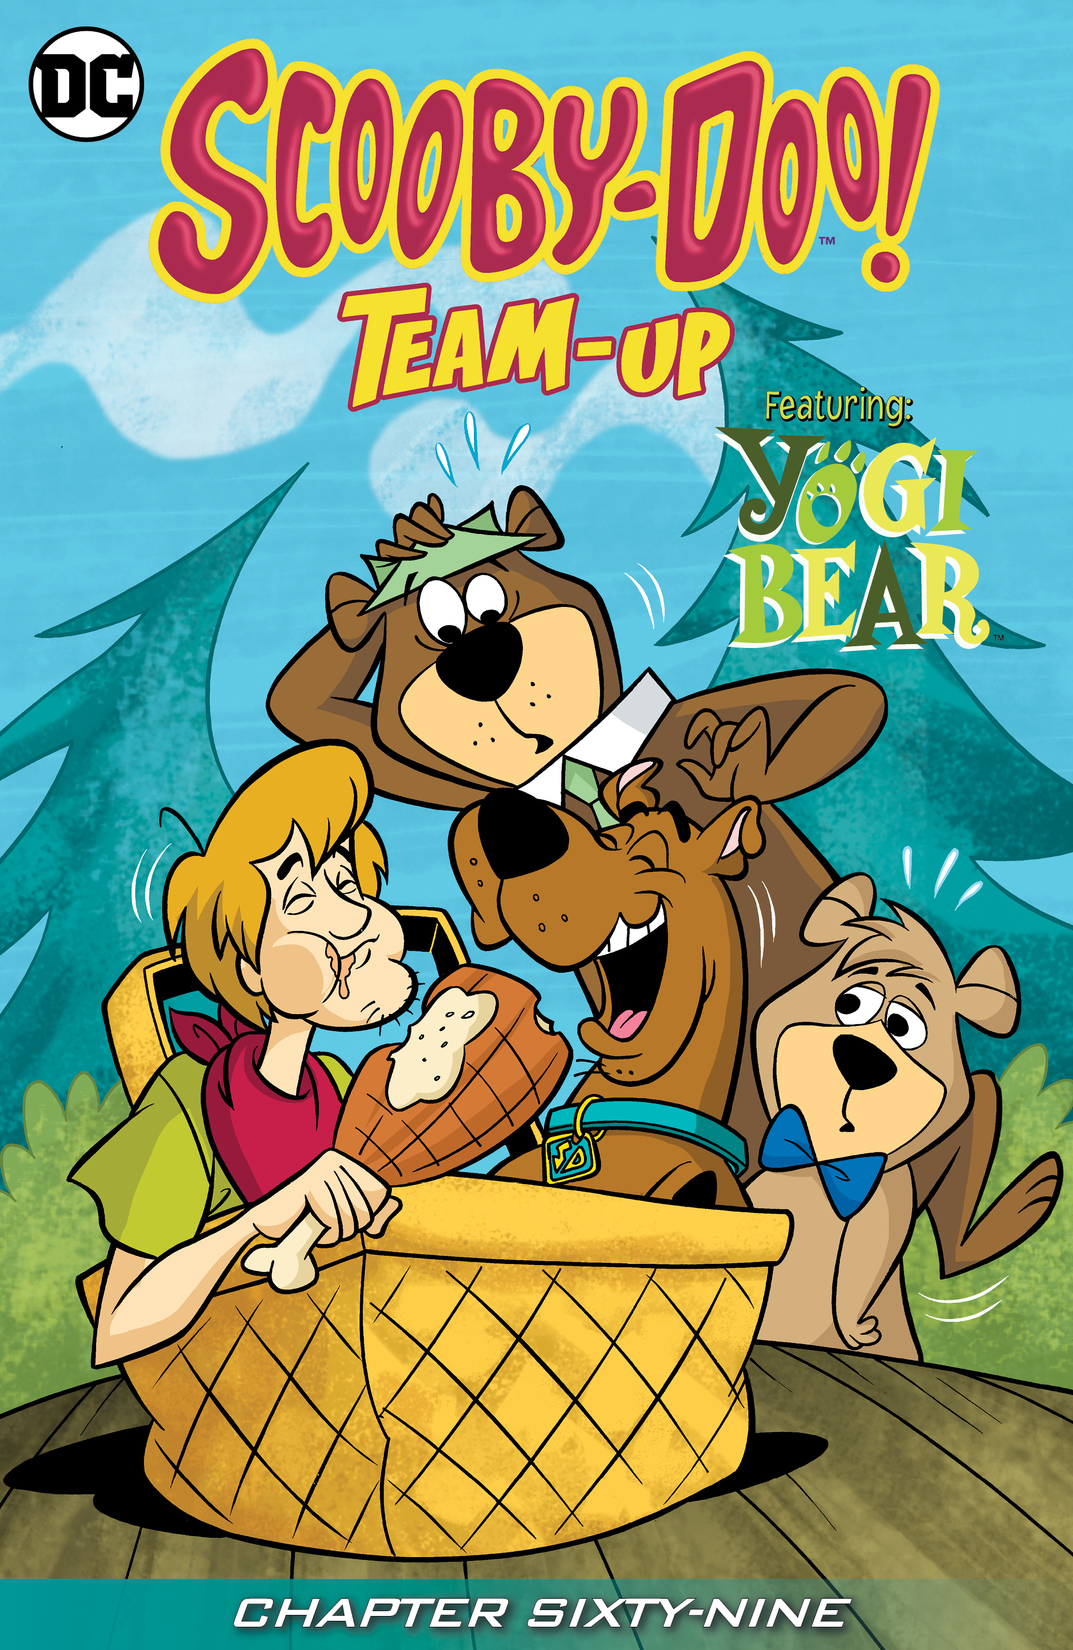 Scooby-Doo Team-Up #69 preview images